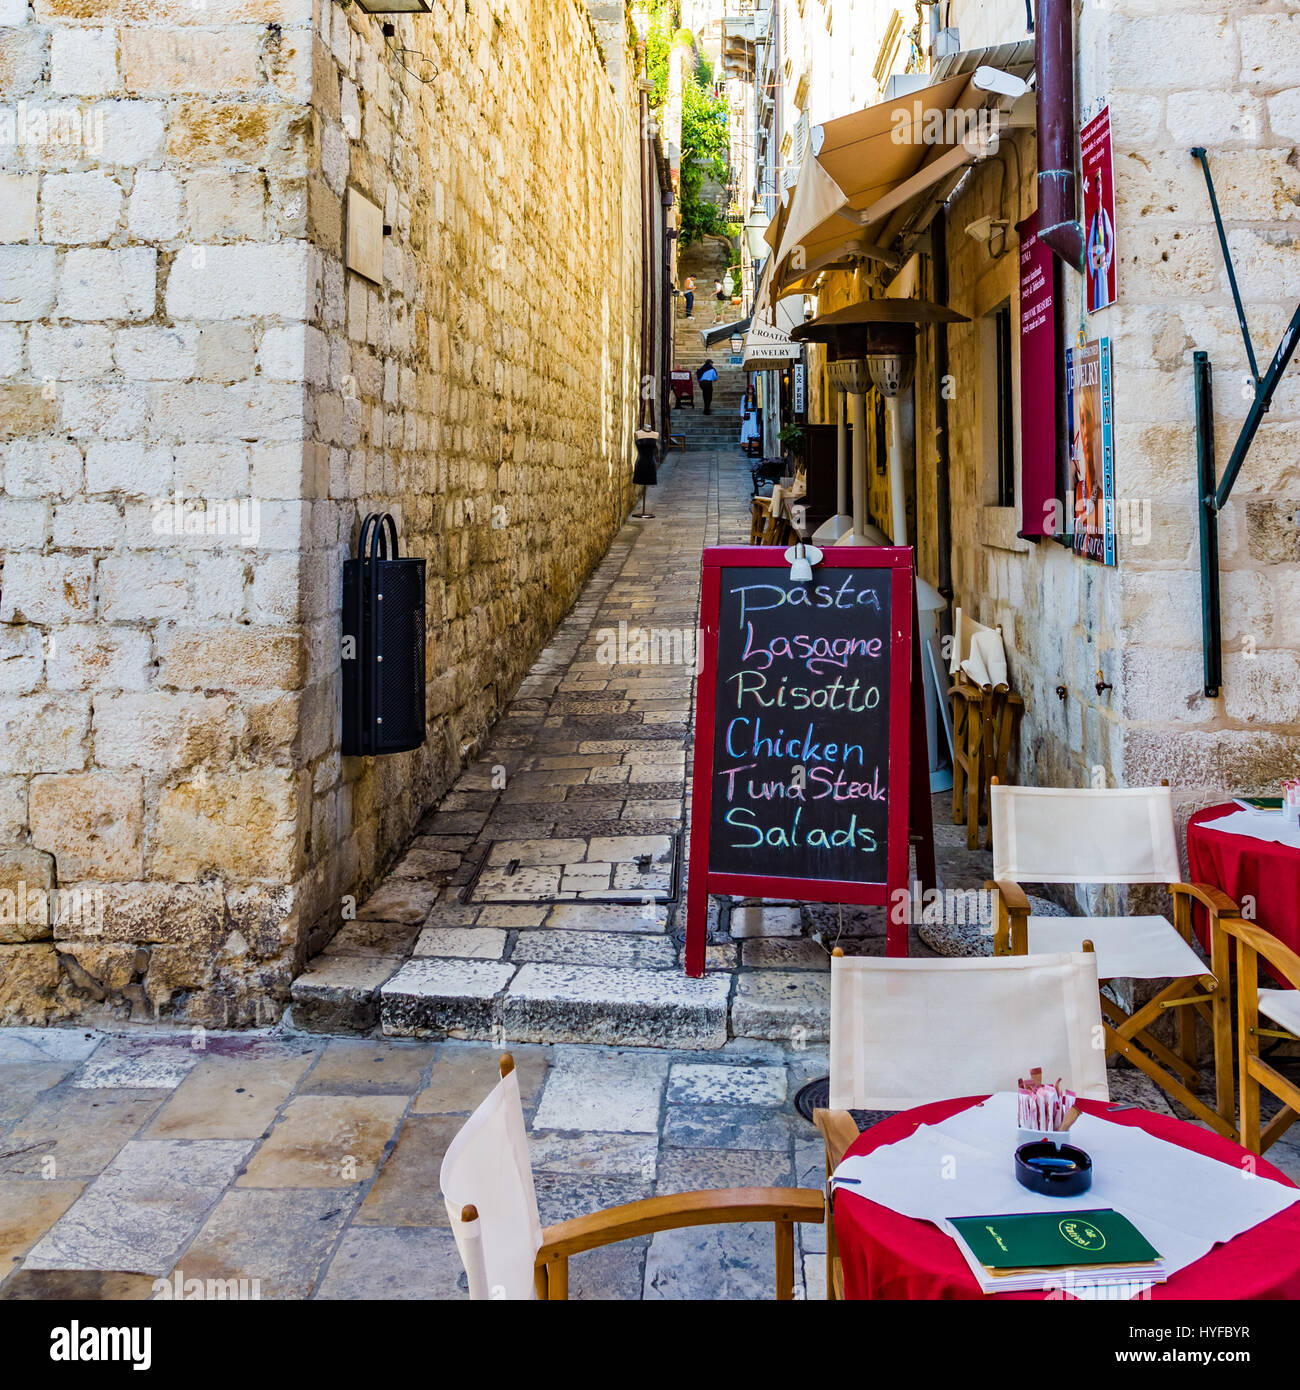 One of the many sets of stairs and restuarants in the walled town at Dubrovnik, Croatia. Stock Photo